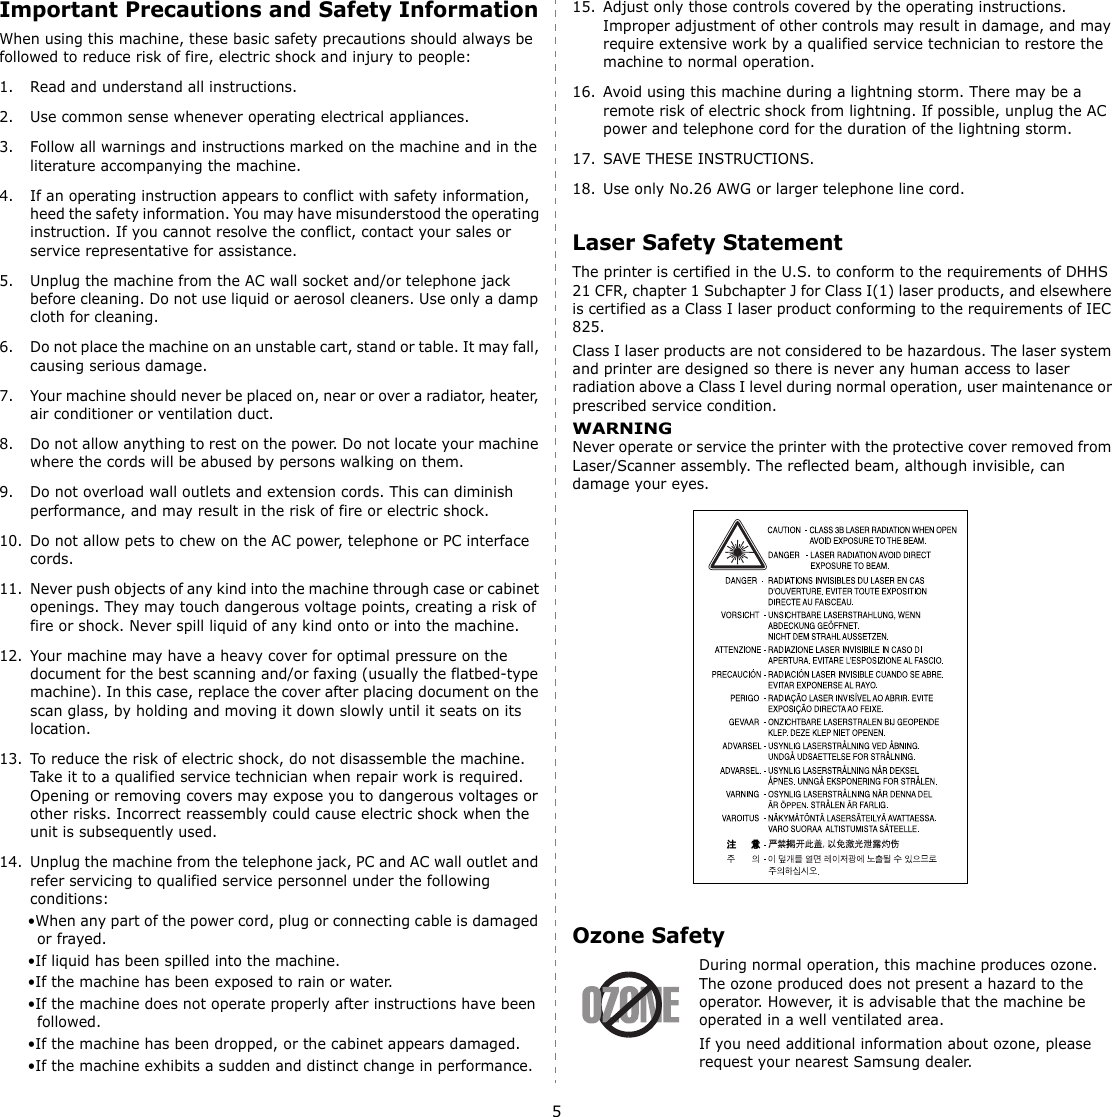 5Important Precautions and Safety InformationWhen using this machine, these basic safety precautions should always be followed to reduce risk of fire, electric shock and injury to people:1. Read and understand all instructions.2. Use common sense whenever operating electrical appliances.3. Follow all warnings and instructions marked on the machine and in the literature accompanying the machine.4. If an operating instruction appears to conflict with safety information, heed the safety information. You may have misunderstood the operating instruction. If you cannot resolve the conflict, contact your sales or service representative for assistance.5. Unplug the machine from the AC wall socket and/or telephone jack before cleaning. Do not use liquid or aerosol cleaners. Use only a damp cloth for cleaning.6. Do not place the machine on an unstable cart, stand or table. It may fall, causing serious damage.7. Your machine should never be placed on, near or over a radiator, heater, air conditioner or ventilation duct.8. Do not allow anything to rest on the power. Do not locate your machine where the cords will be abused by persons walking on them.9. Do not overload wall outlets and extension cords. This can diminish performance, and may result in the risk of fire or electric shock.10. Do not allow pets to chew on the AC power, telephone or PC interface cords.11. Never push objects of any kind into the machine through case or cabinet openings. They may touch dangerous voltage points, creating a risk of fire or shock. Never spill liquid of any kind onto or into the machine.12. Your machine may have a heavy cover for optimal pressure on the document for the best scanning and/or faxing (usually the flatbed-type machine). In this case, replace the cover after placing document on the scan glass, by holding and moving it down slowly until it seats on its location.13. To reduce the risk of electric shock, do not disassemble the machine. Take it to a qualified service technician when repair work is required. Opening or removing covers may expose you to dangerous voltages or other risks. Incorrect reassembly could cause electric shock when the unit is subsequently used. 14. Unplug the machine from the telephone jack, PC and AC wall outlet and refer servicing to qualified service personnel under the following conditions:•When any part of the power cord, plug or connecting cable is damaged or frayed.•If liquid has been spilled into the machine. •If the machine has been exposed to rain or water.•If the machine does not operate properly after instructions have been followed.•If the machine has been dropped, or the cabinet appears damaged.•If the machine exhibits a sudden and distinct change in performance.15. Adjust only those controls covered by the operating instructions. Improper adjustment of other controls may result in damage, and may require extensive work by a qualified service technician to restore the machine to normal operation.16. Avoid using this machine during a lightning storm. There may be a remote risk of electric shock from lightning. If possible, unplug the AC power and telephone cord for the duration of the lightning storm.17. SAVE THESE INSTRUCTIONS.18. Use only No.26 AWG or larger telephone line cord.Laser Safety StatementThe printer is certified in the U.S. to conform to the requirements of DHHS 21 CFR, chapter 1 Subchapter J for Class I(1) laser products, and elsewhere is certified as a Class I laser product conforming to the requirements of IEC 825.Class I laser products are not considered to be hazardous. The laser system and printer are designed so there is never any human access to laser radiation above a Class I level during normal operation, user maintenance or prescribed service condition.WARNING Never operate or service the printer with the protective cover removed from Laser/Scanner assembly. The reflected beam, although invisible, can damage your eyes.Ozone SafetyDuring normal operation, this machine produces ozone. The ozone produced does not present a hazard to the operator. However, it is advisable that the machine be operated in a well ventilated area.If you need additional information about ozone, please request your nearest Samsung dealer.